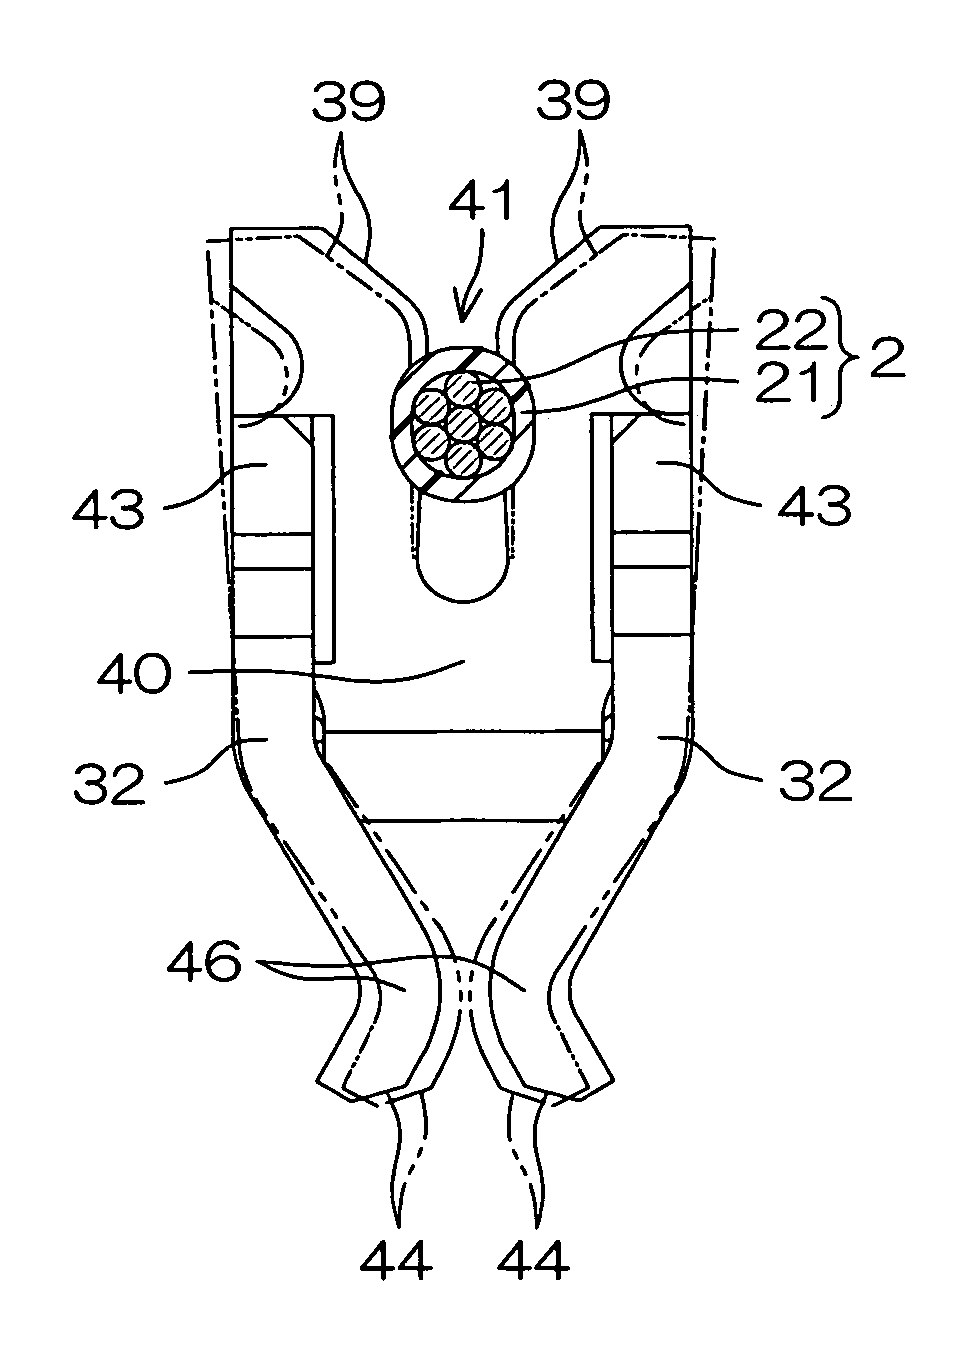 Insulation displacement contact and electric connector using the same